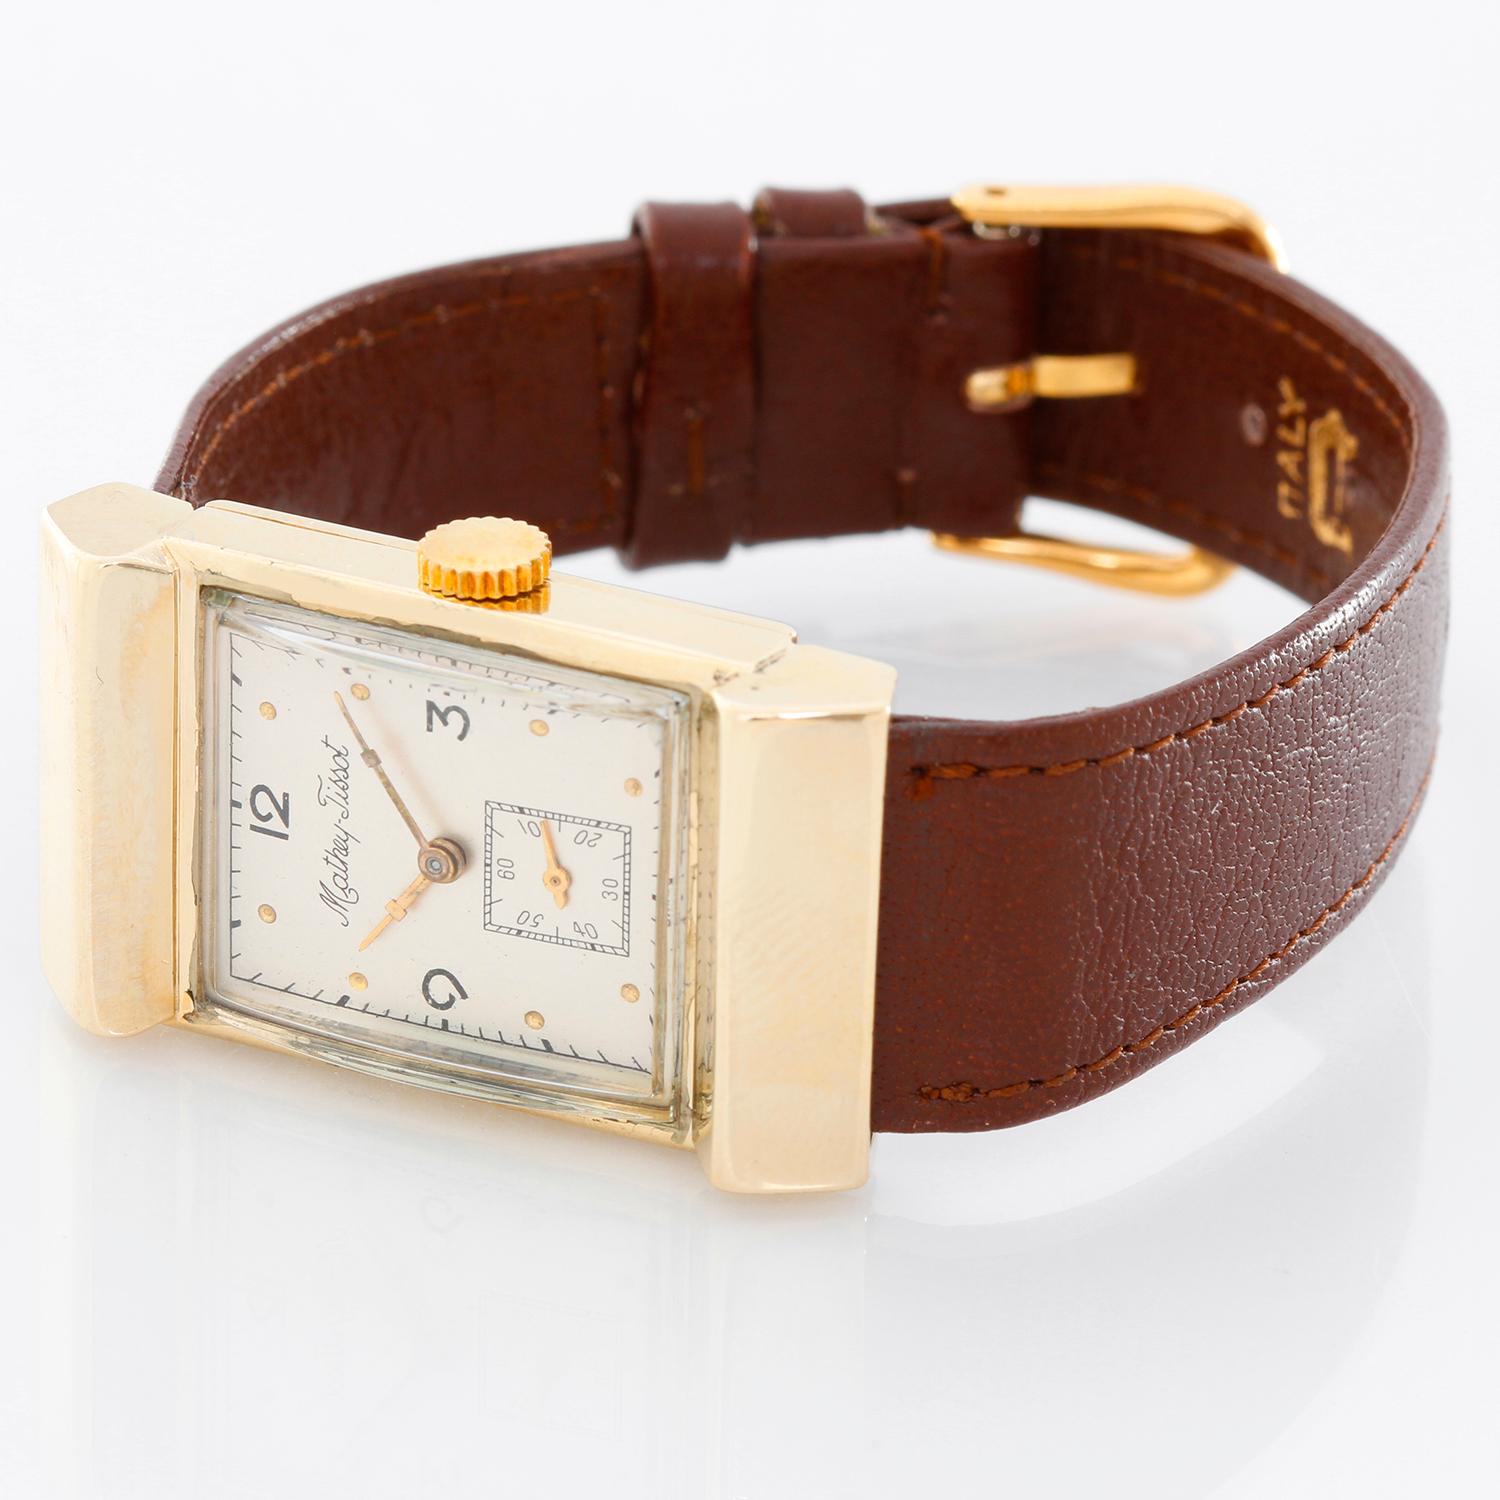 Vintage Mathy Tissot Men's Watch  - Manual . 14K Yellow Gold (  21 x 39 mm ) . Silver dial with Arabic numbers at 12, 3,  and 9 o'clock . Brown buffalo strap . Pre-owned with custom box. Circa 1940-1950's  .